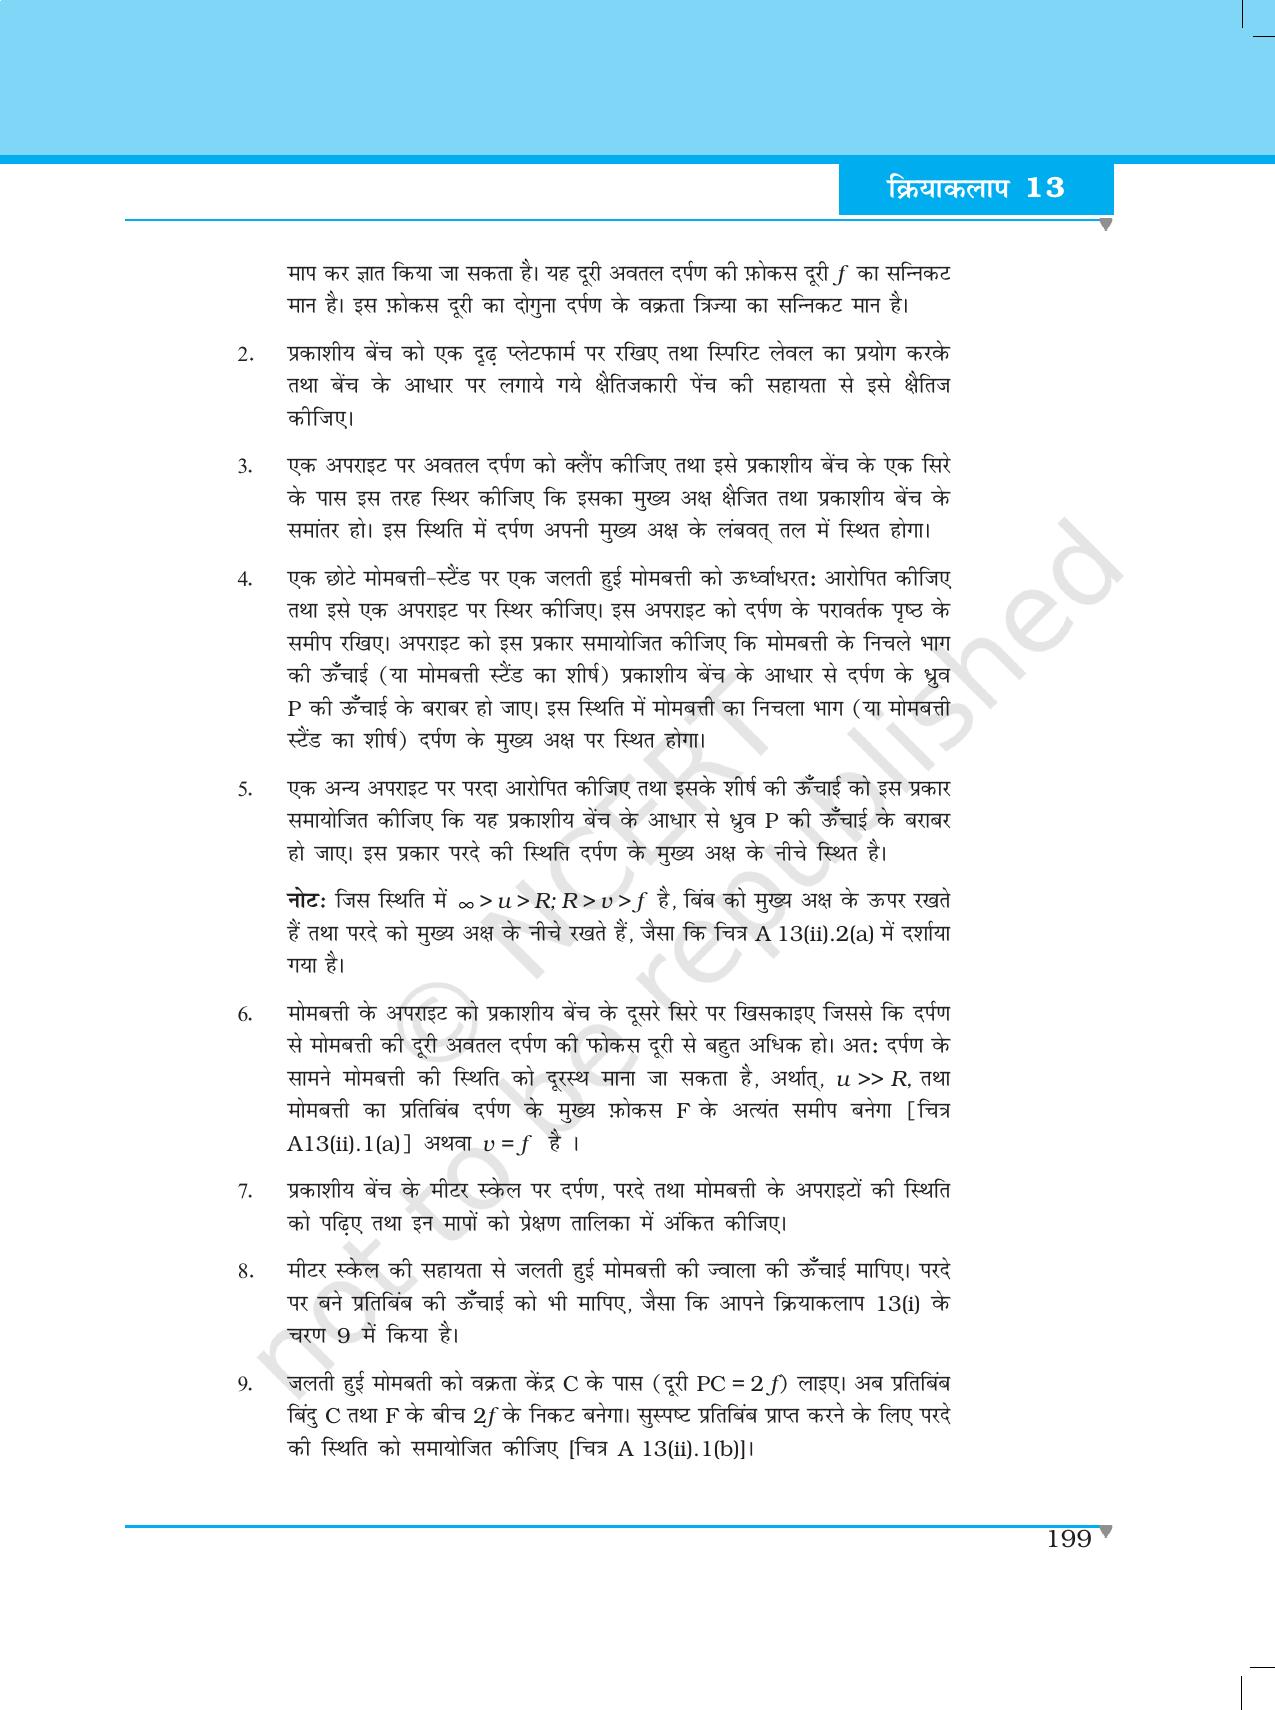 NCERT Laboratory Manuals for Class XII भौतिकी - क्रियाकलाप (12 - 14) - Page 10